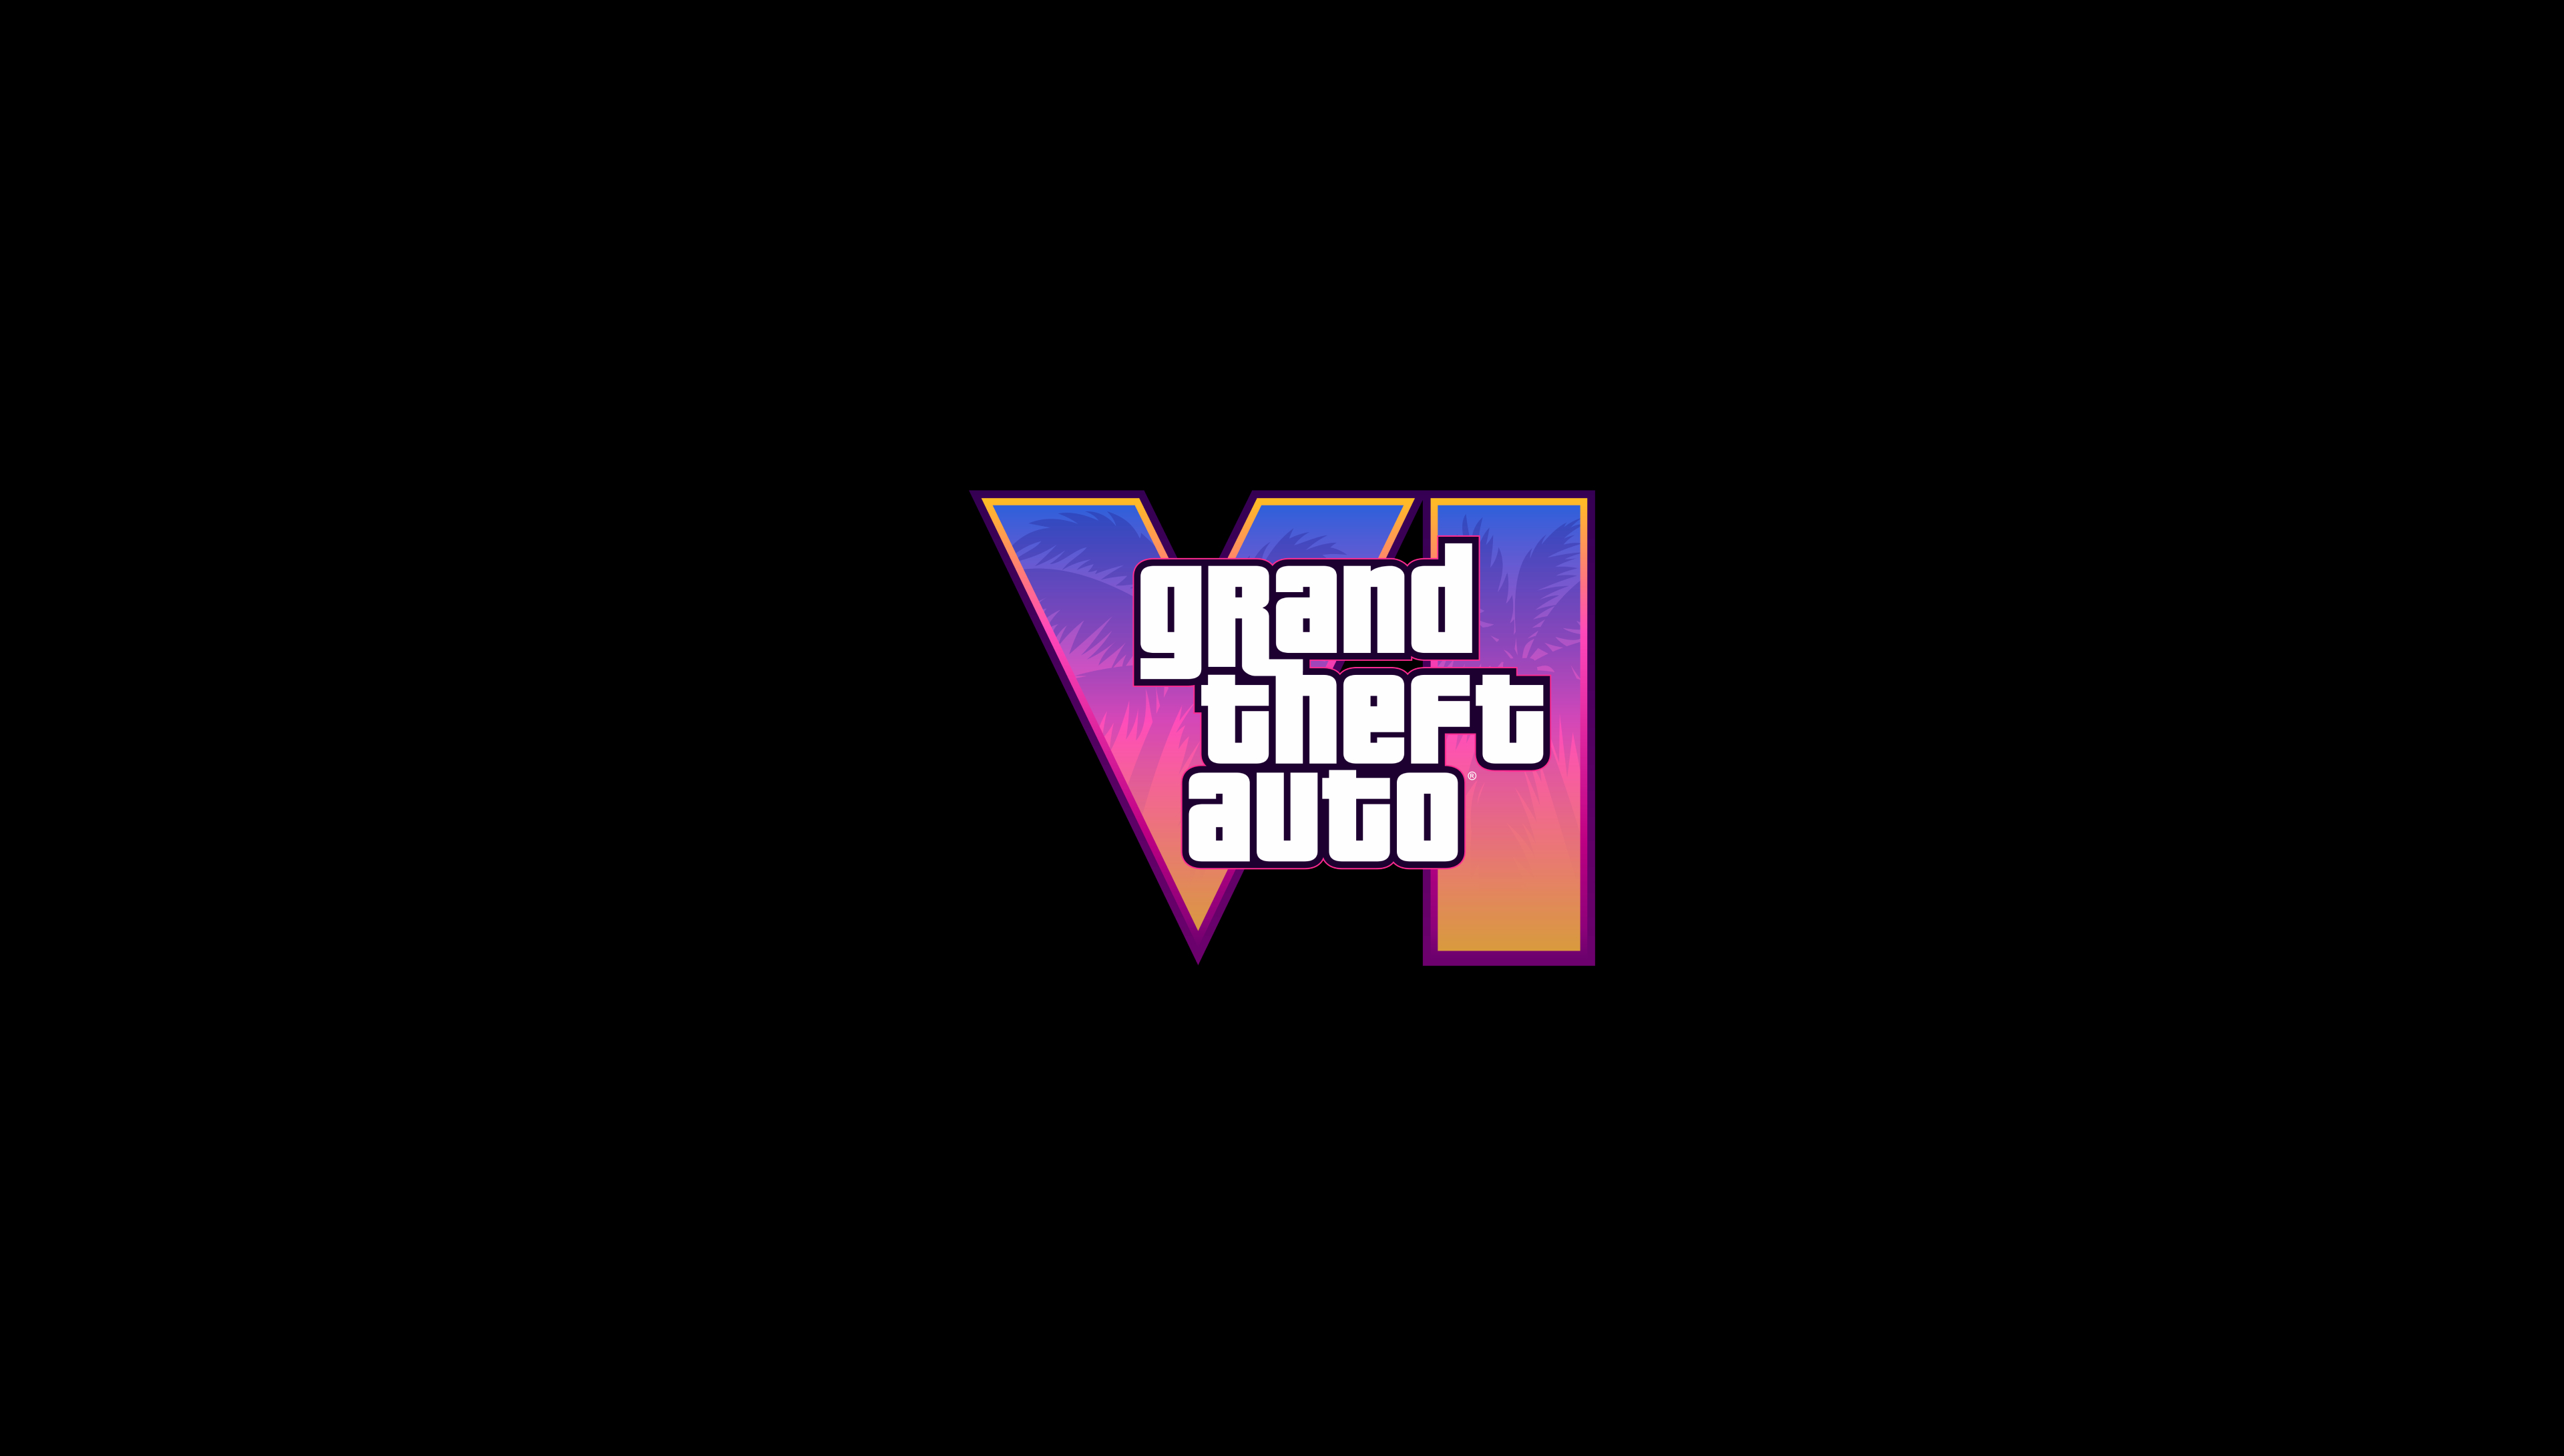 Grand Theft Auto VI Logo Wallpaper, HD Games 4K Wallpapers, Images and ...